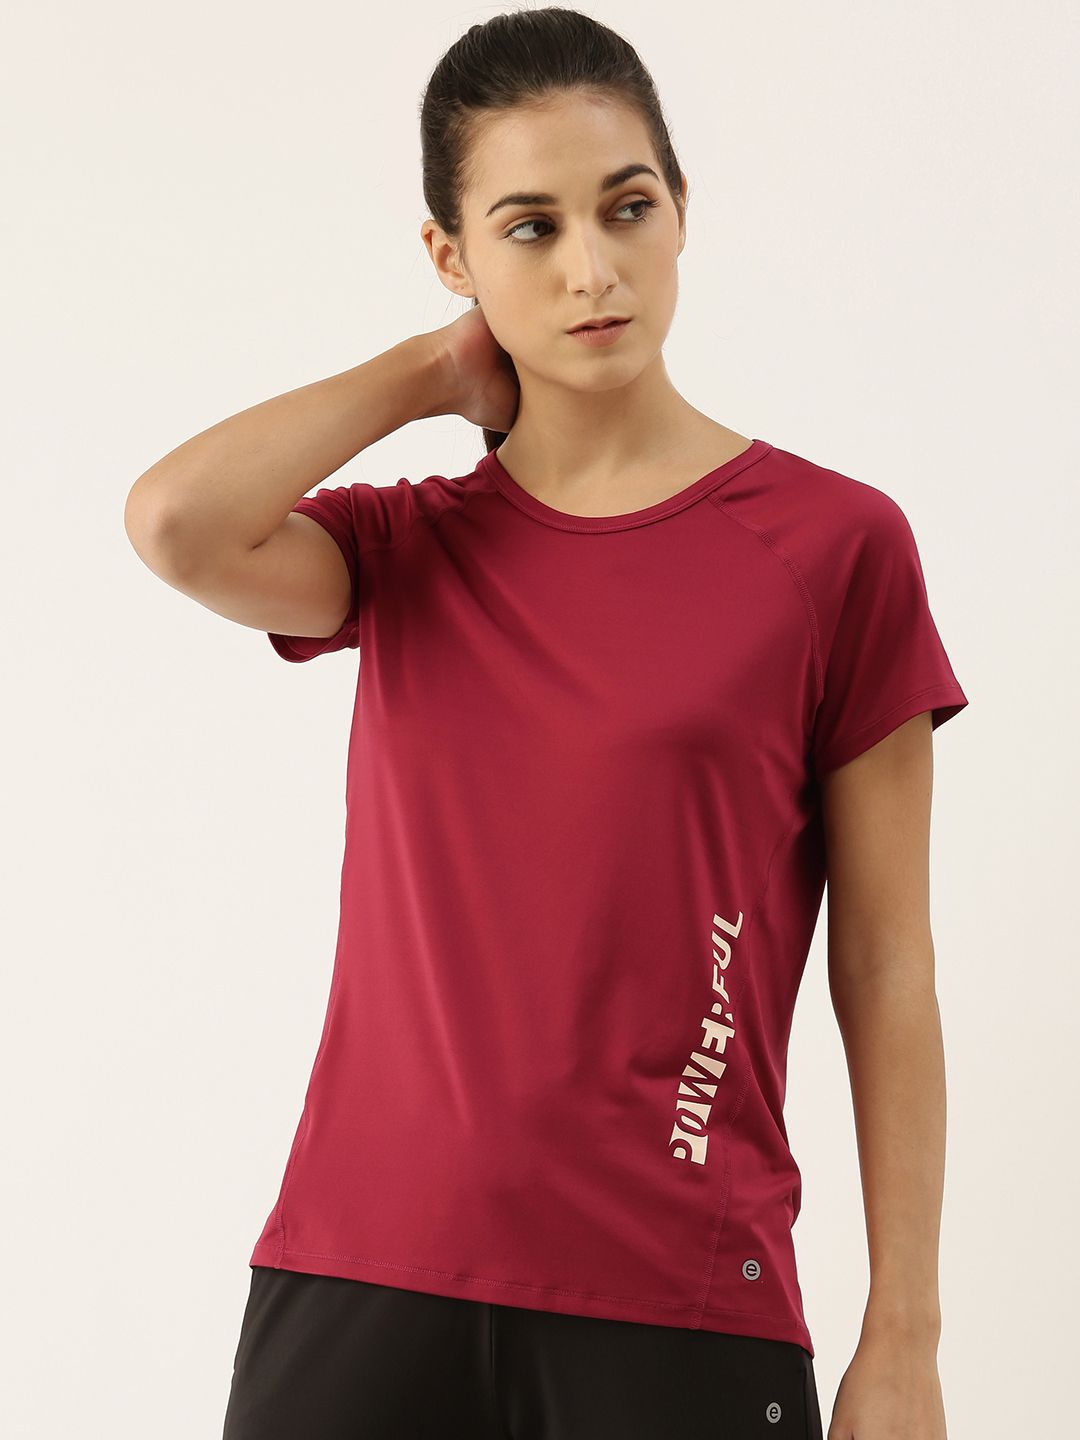 Enamor Women Burgundy Printed Antimicrobial Outdoor T-shirt Price in India